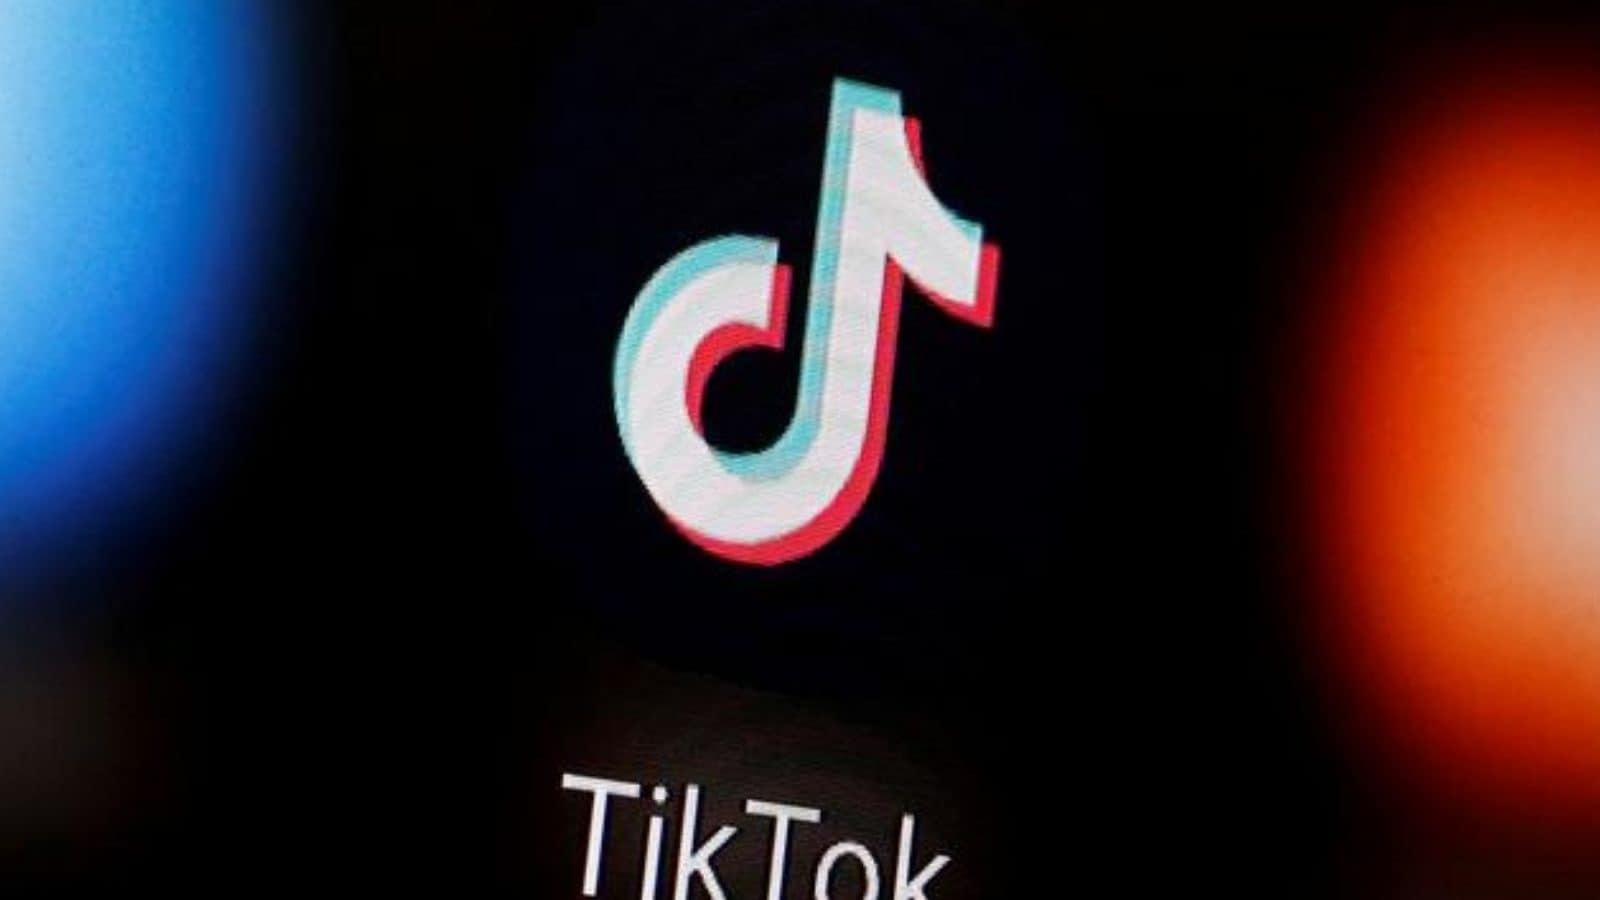 TikTok Says It Has Over 1 Billion Active Users In Just Four Years After Launch